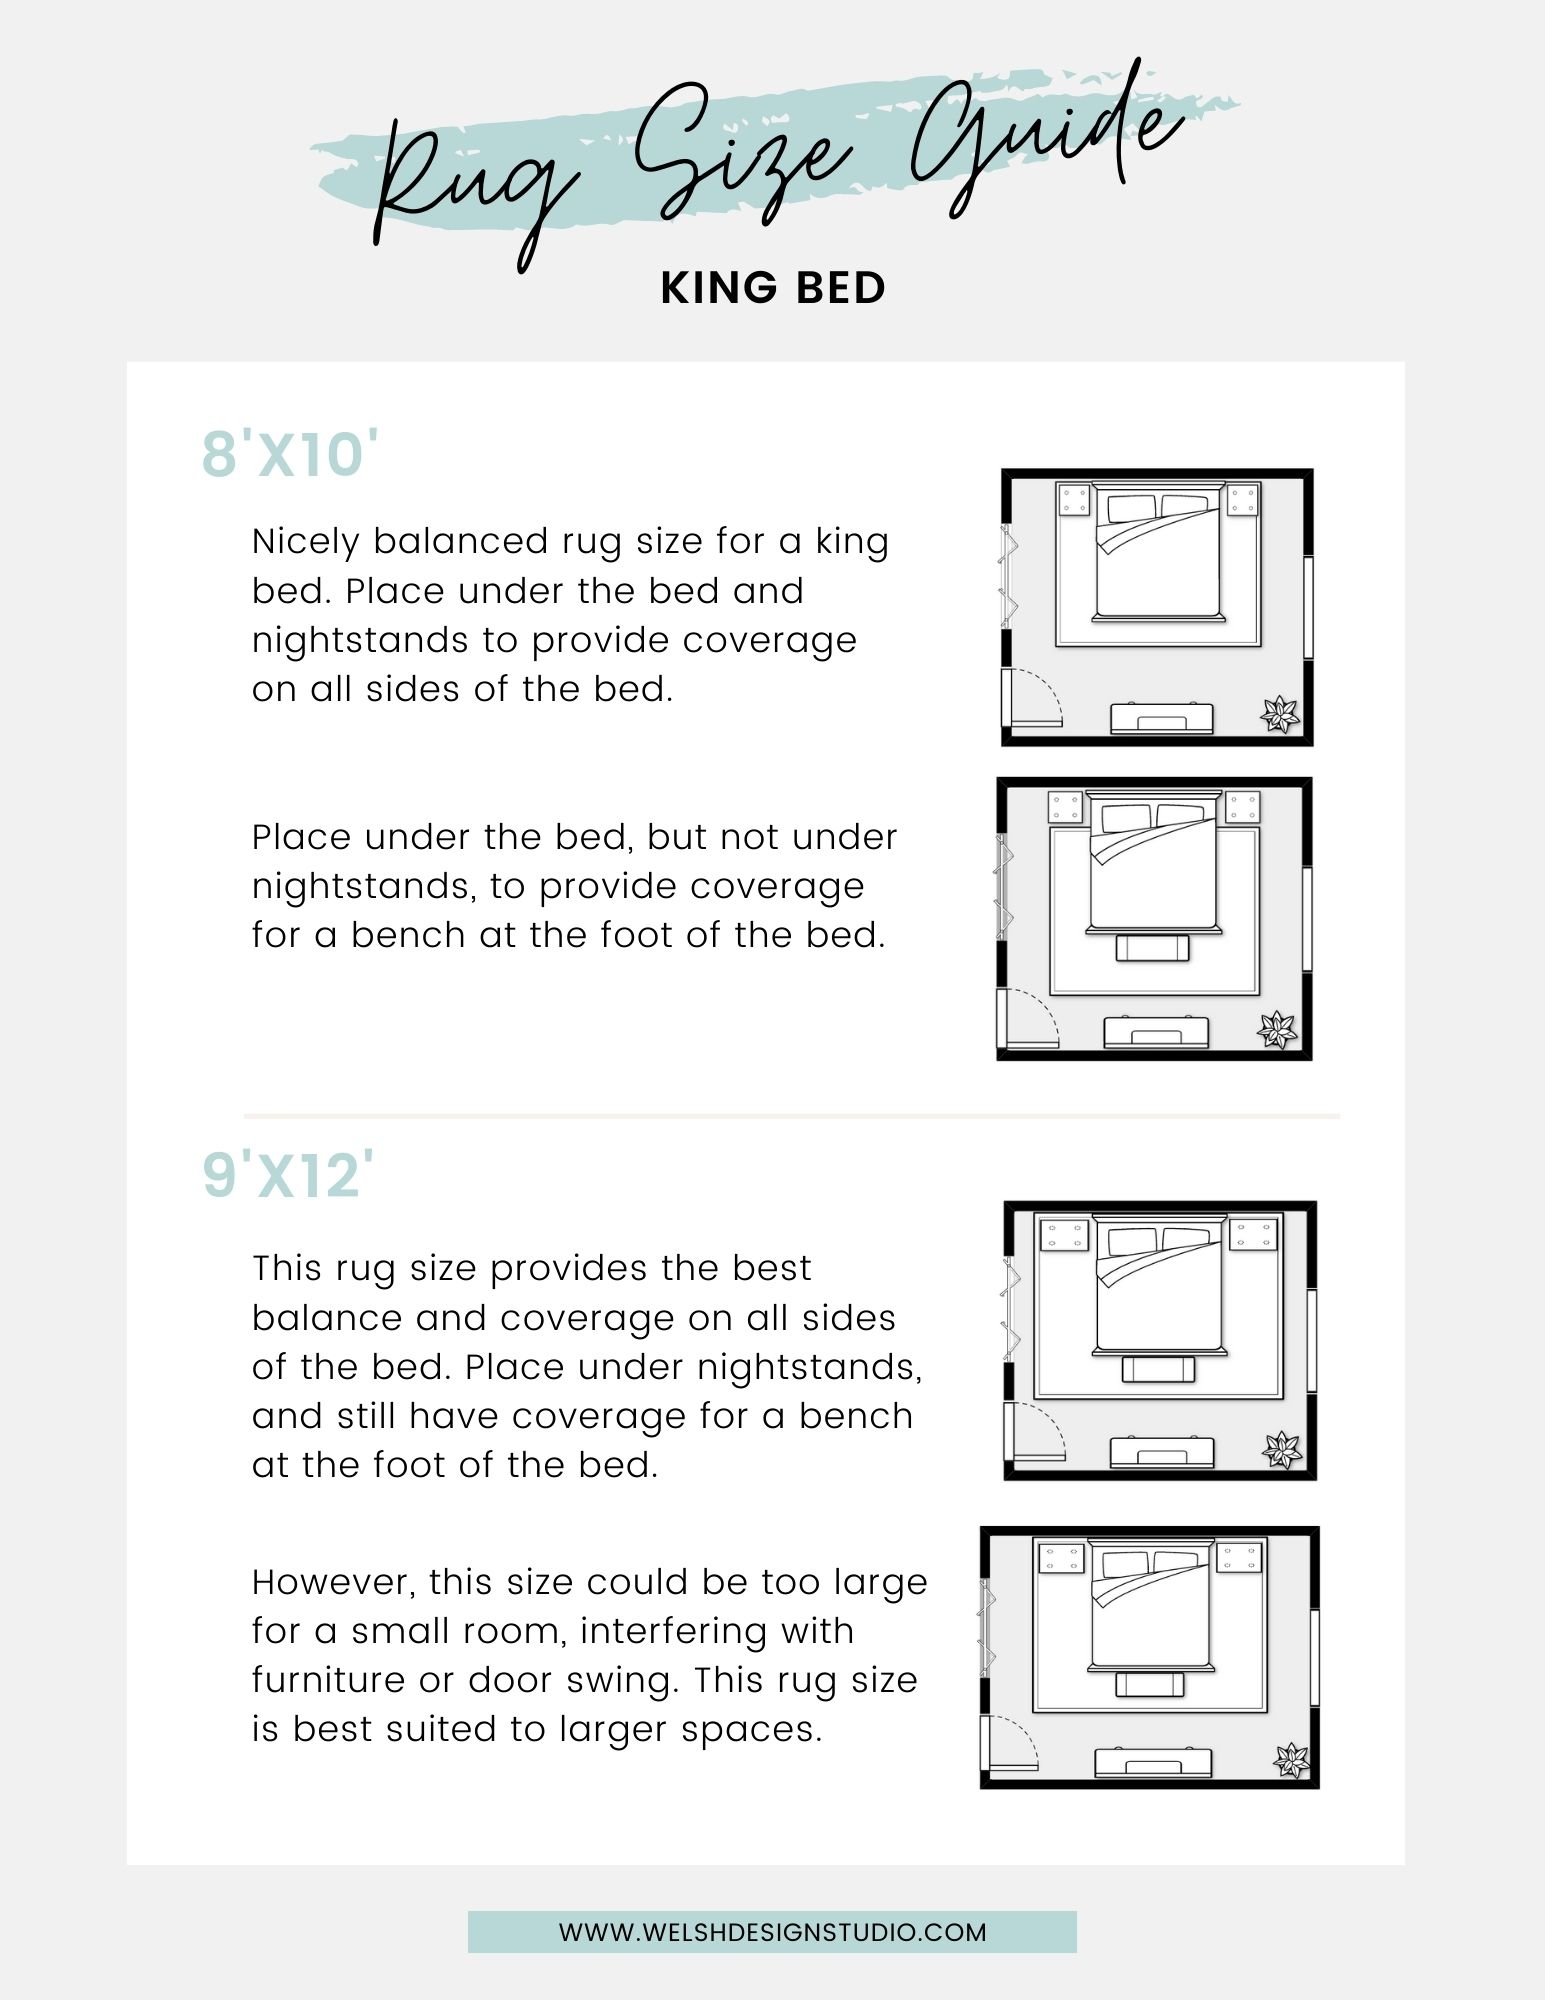 How to Place a Rug under a Bed: Size and Layout Tips